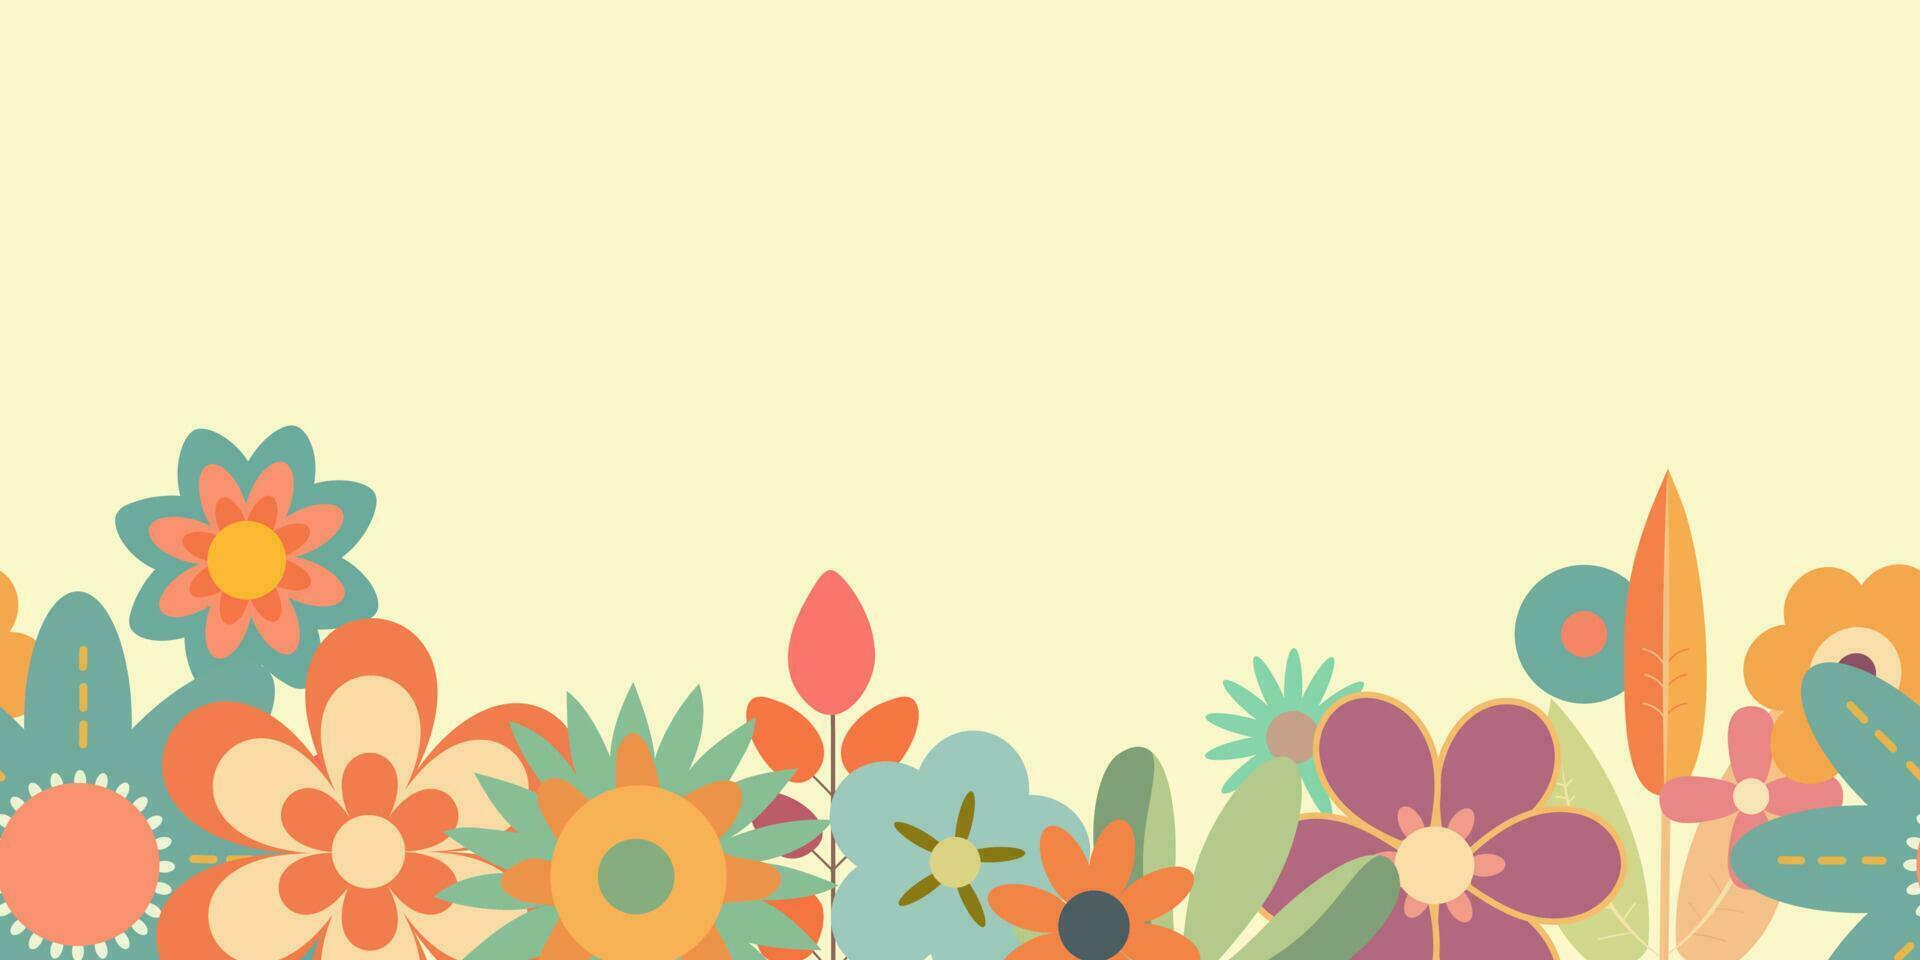 Border with groovy hippie retro flowers in flat style. Seamless vector